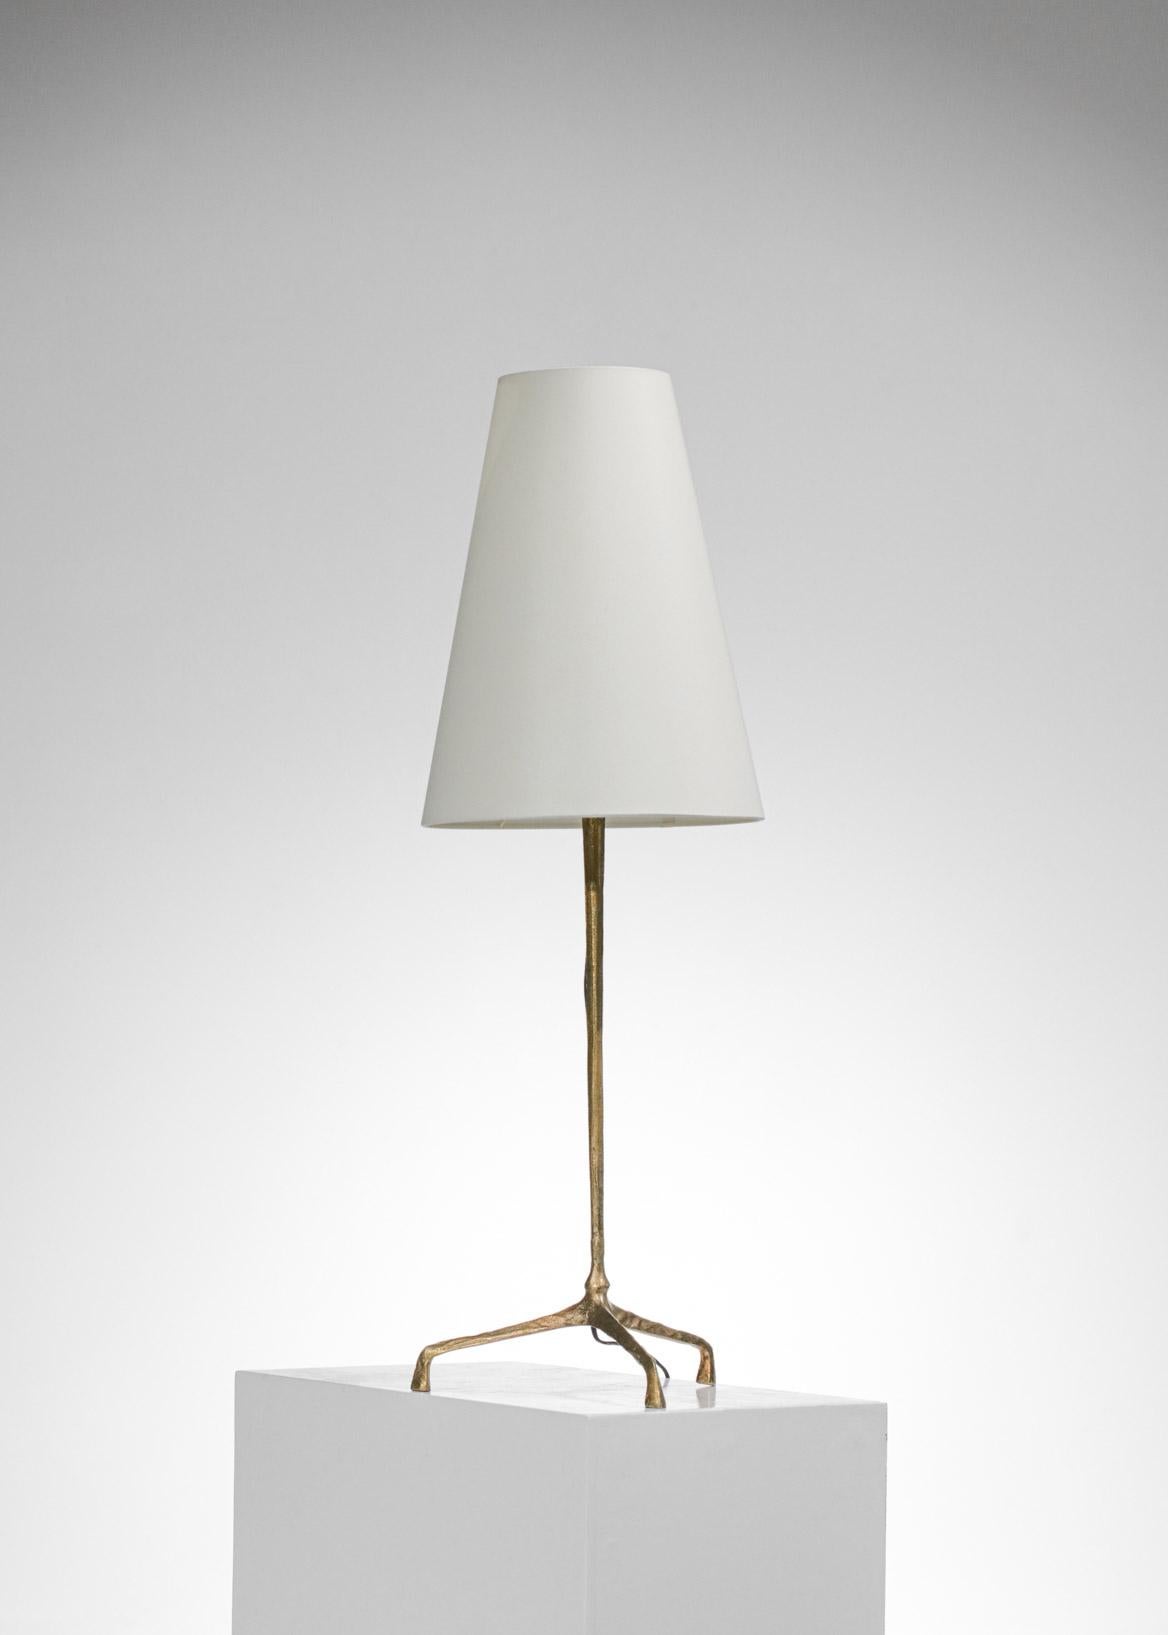 French Large Table Lamp by Felix Agostini in Gilded Bronze 50's - F423 4